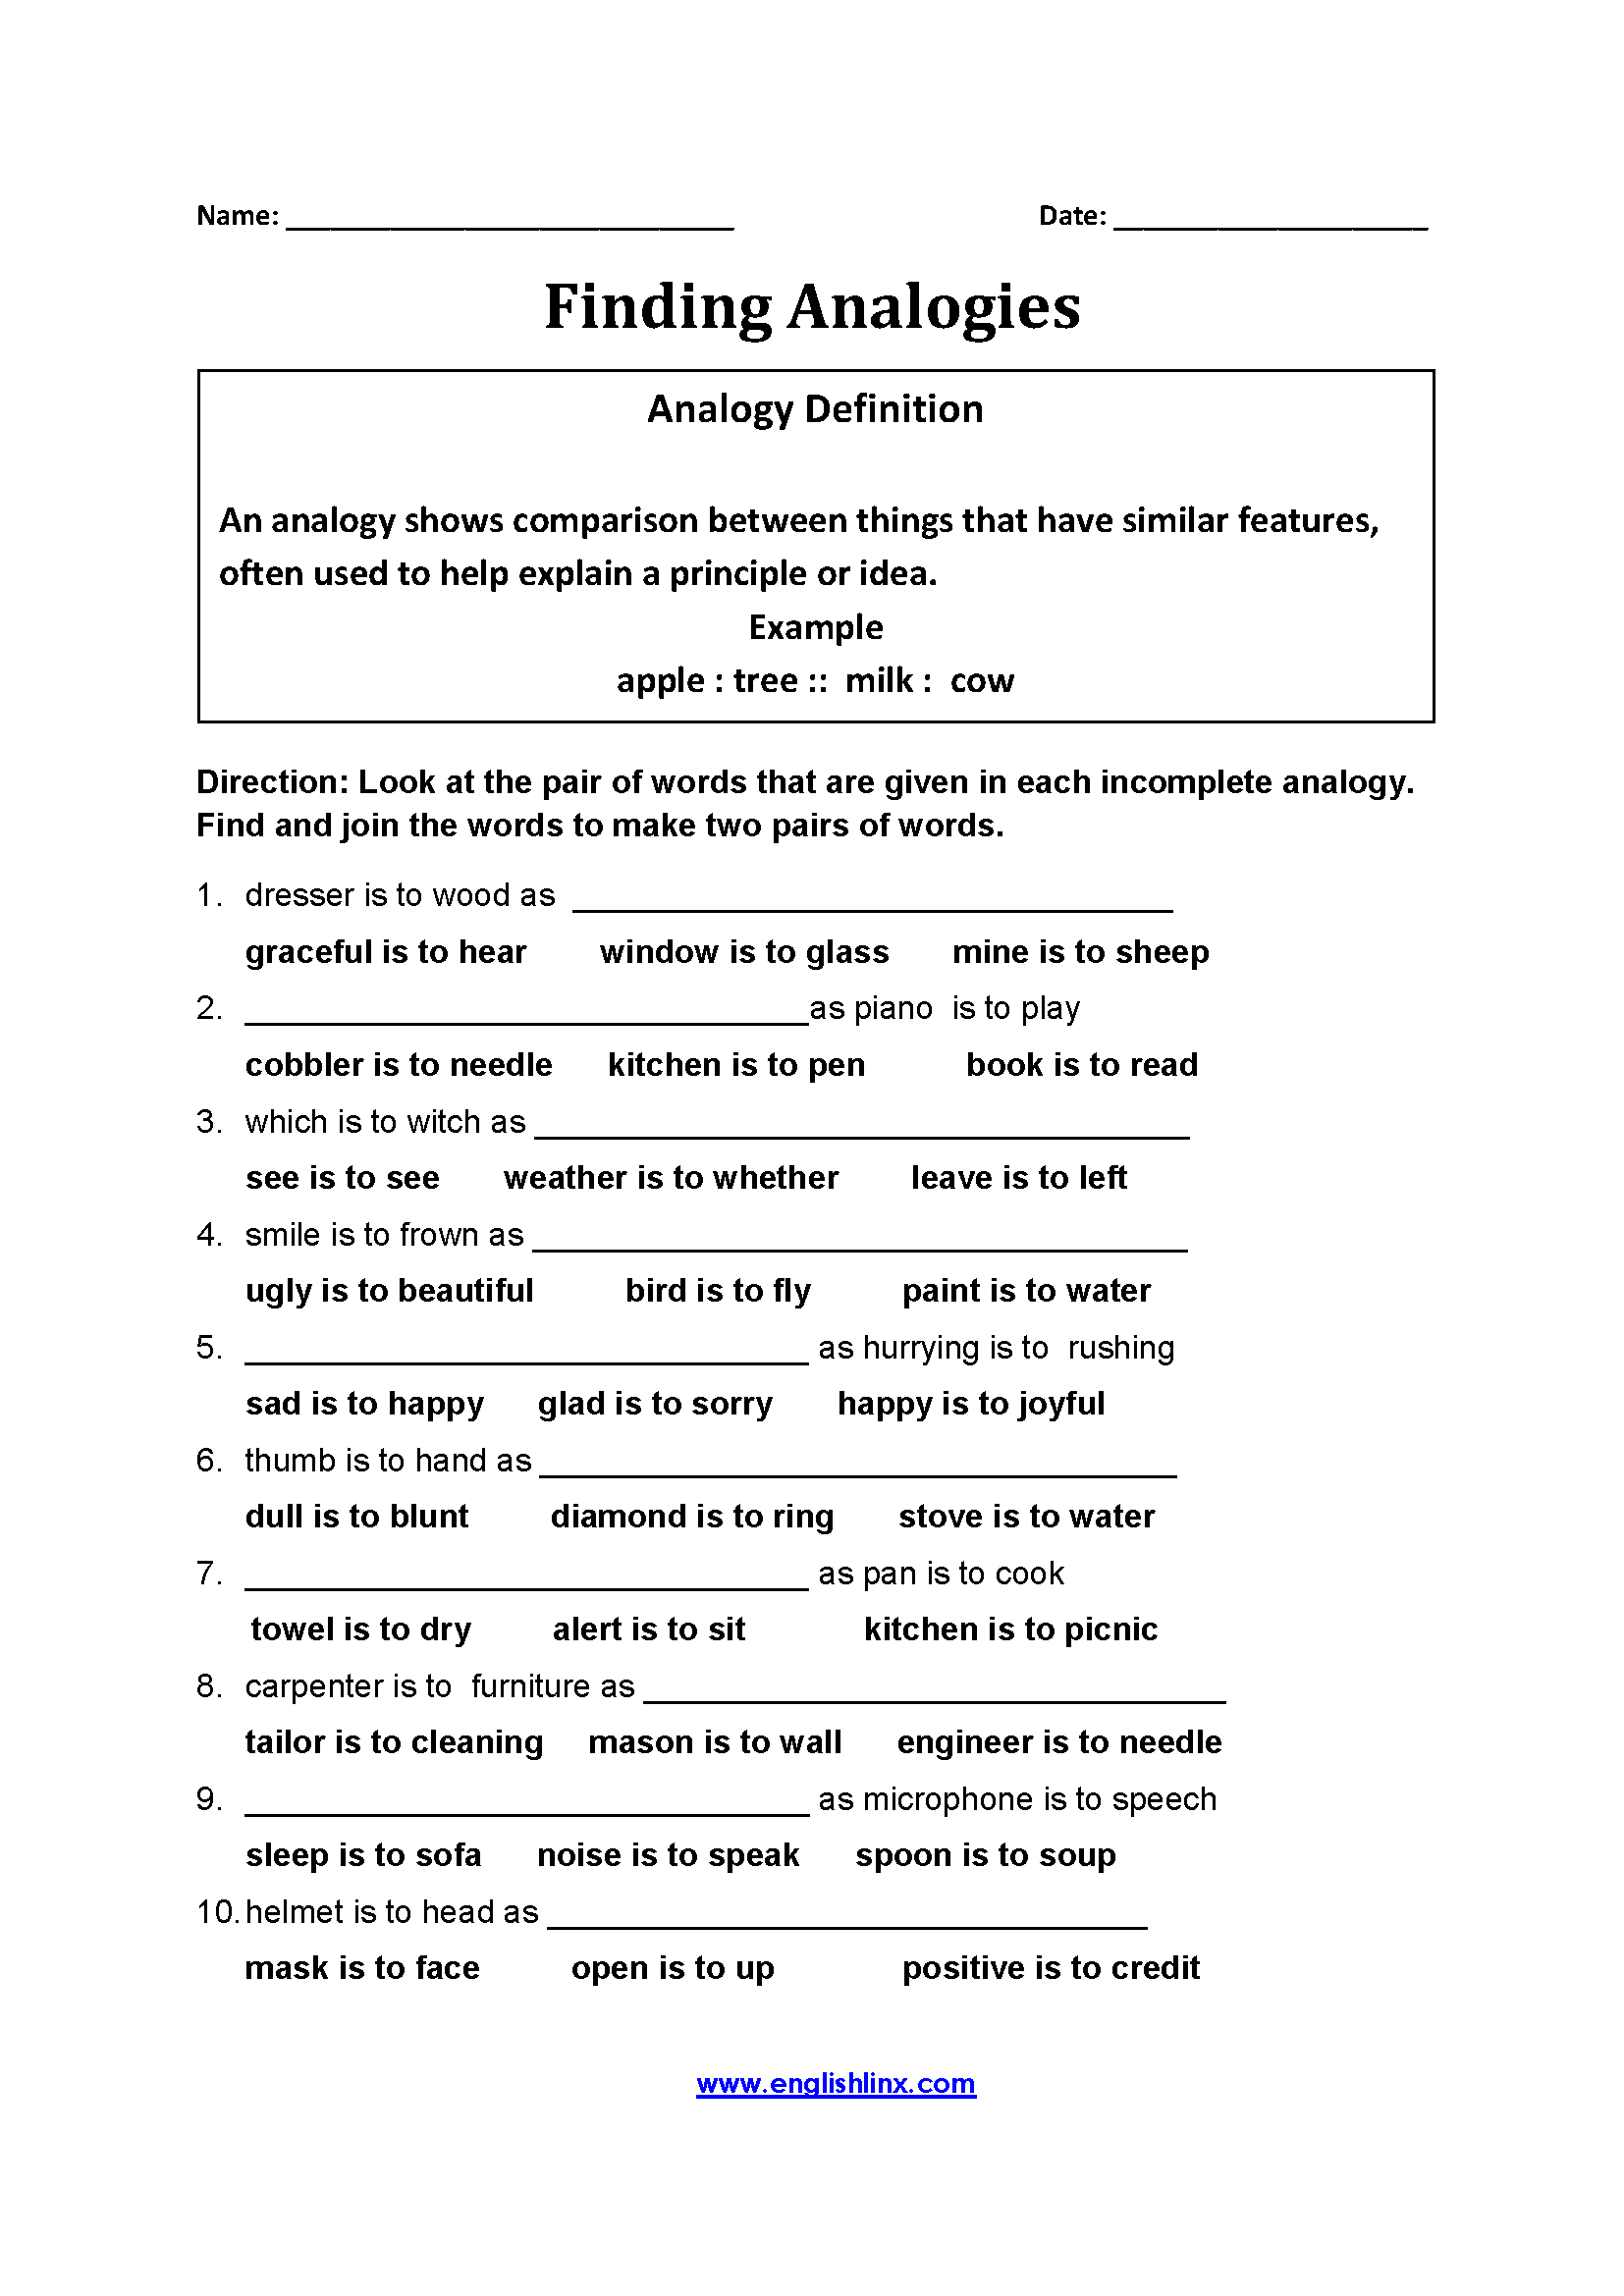 analogy-fill-in-the-blanks-worksheet-have-fun-teaching